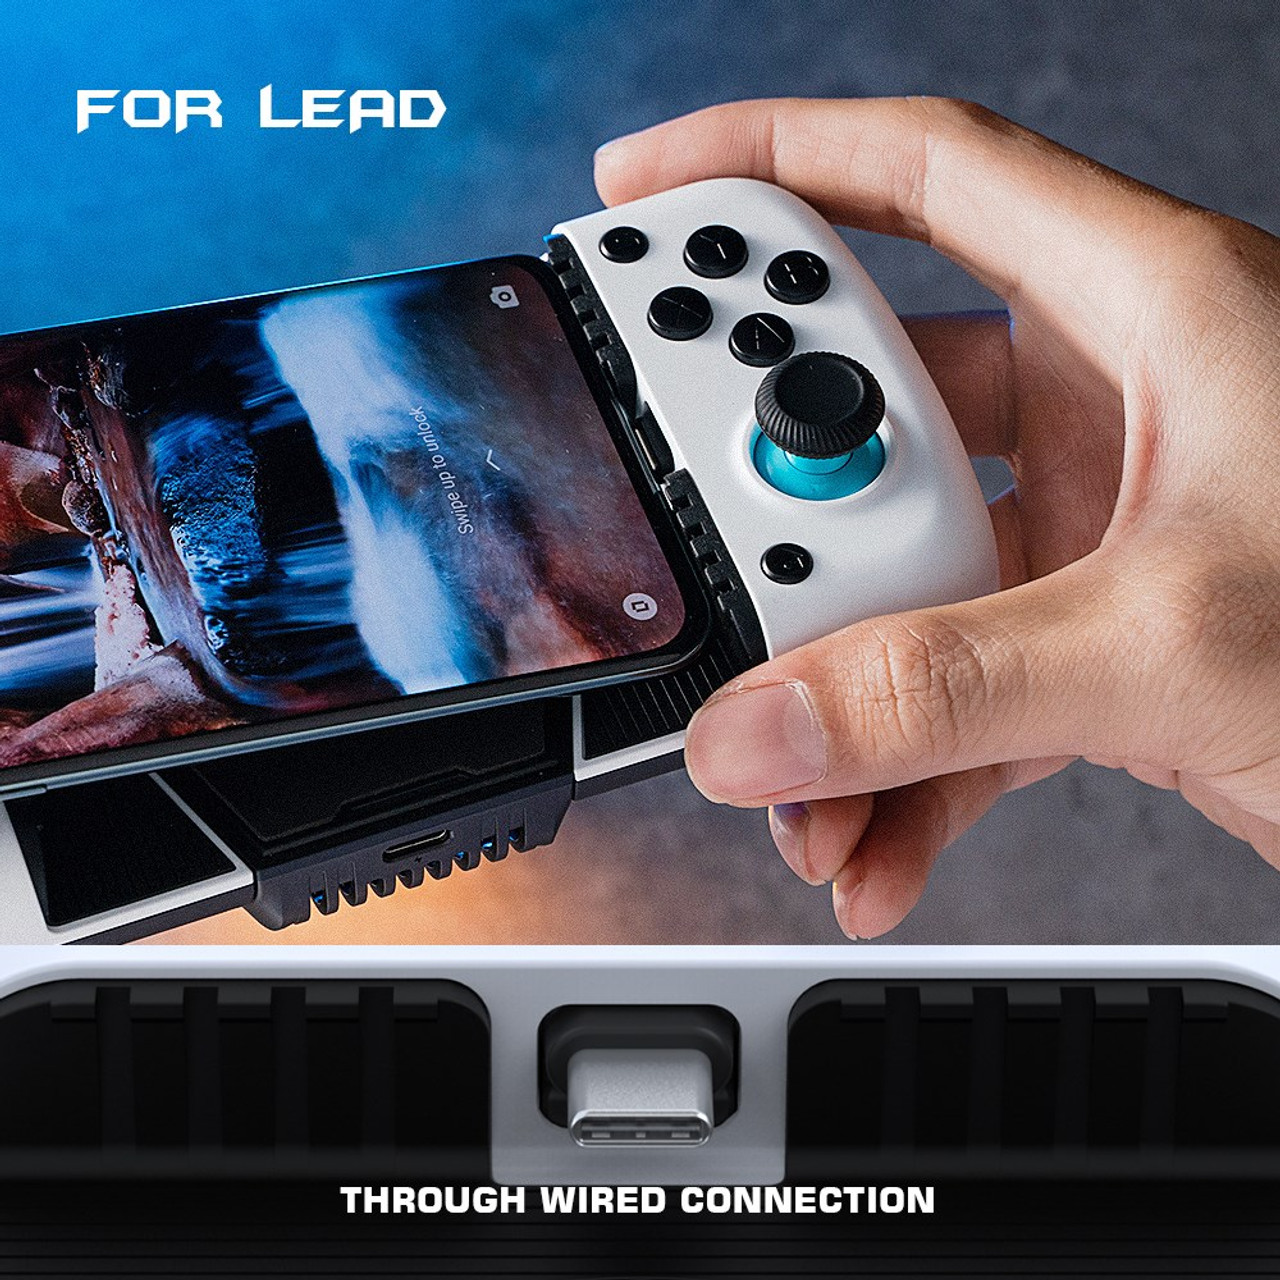 GameSir X2 Bluetooth Gamepad Mobile Game Controller for Android Smartphone  iPhone Cloud Gaming Xbox Game Pass STADIA GeForce Now